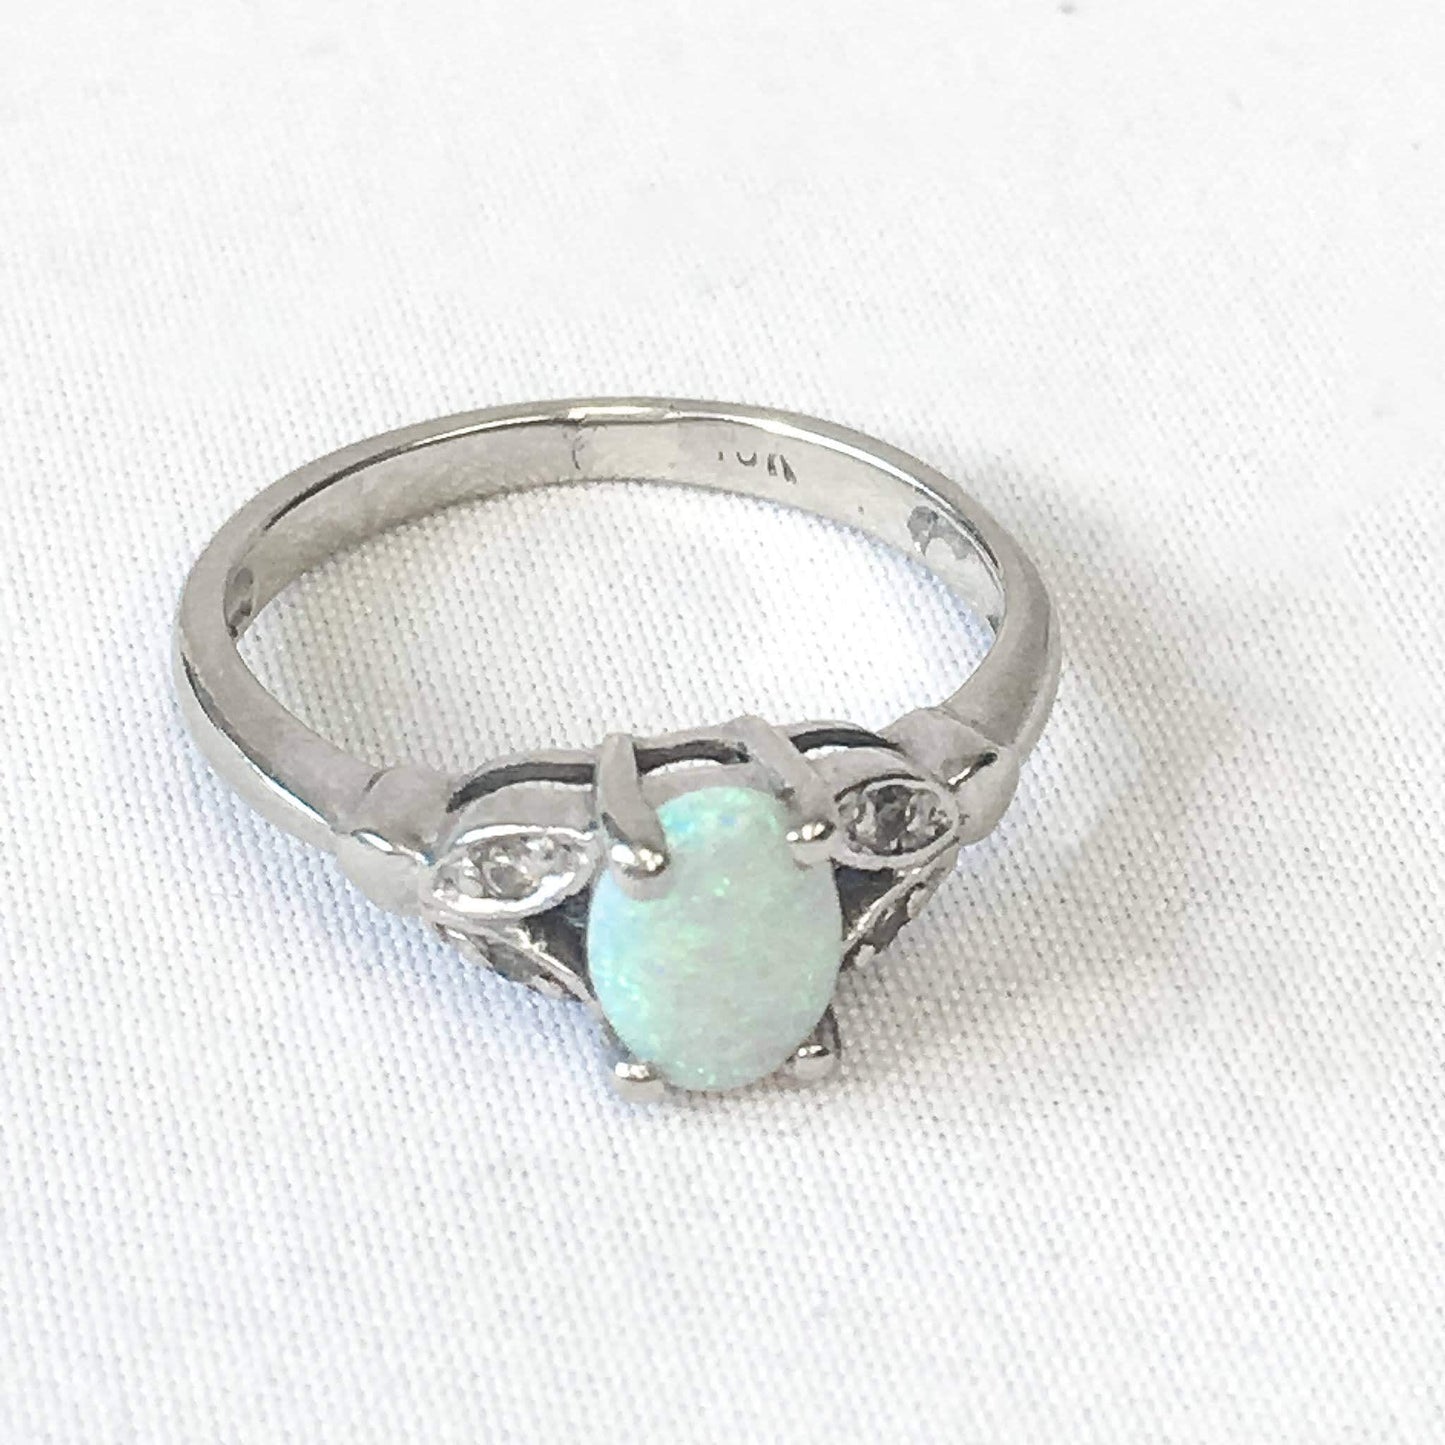 Vintage 10k White Gold Ring with Opal and Diamond Accent, Size 5